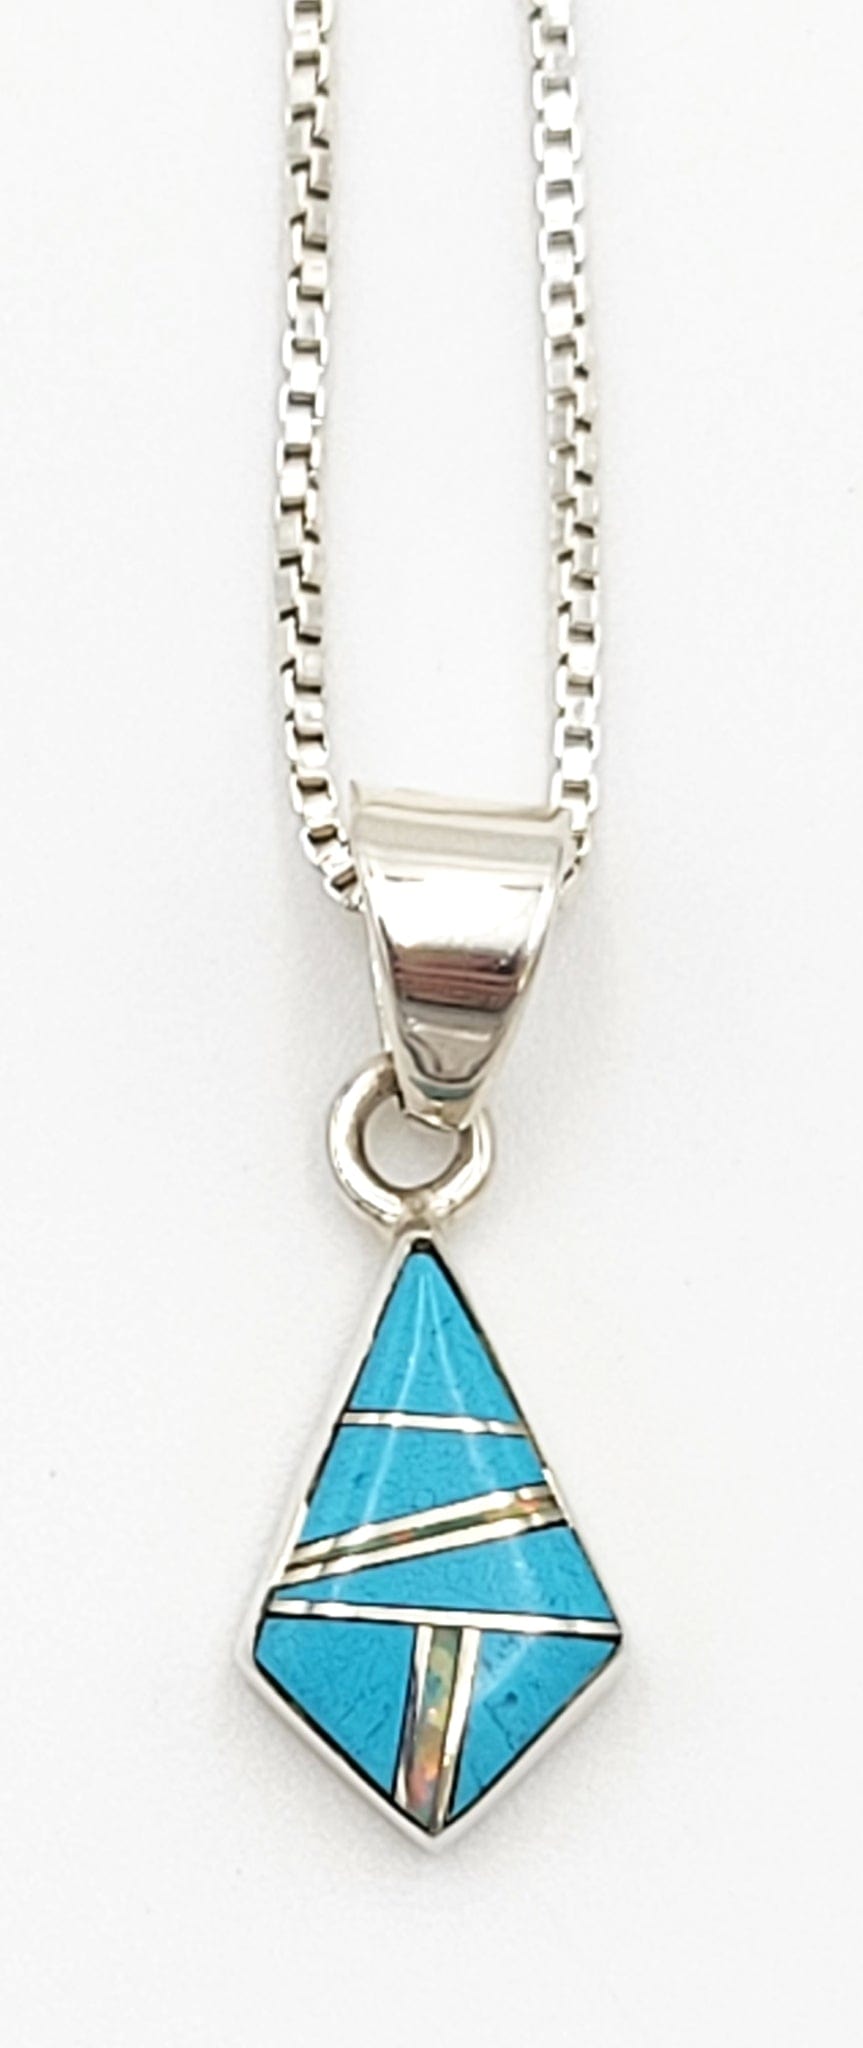 DM Begay Jewelry Navajo Artist DM Begay Sterling Turquoise Fire Opal Modernist Necklace Circa 1990s